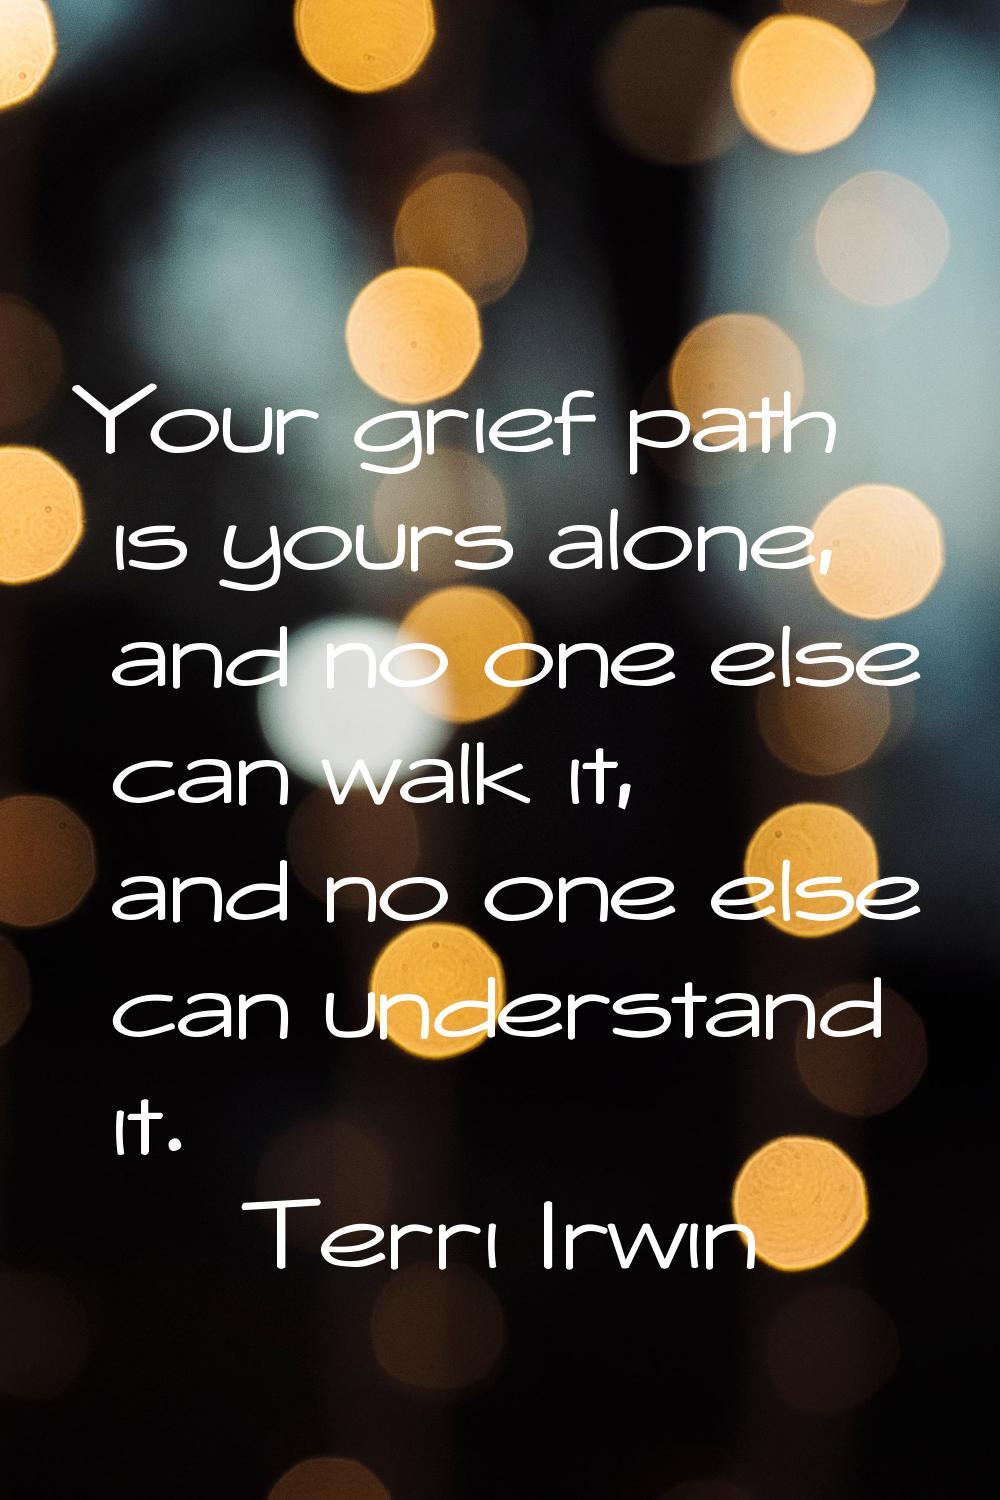 Your grief path is yours alone, and no one else can walk it, and no one else can understand it.